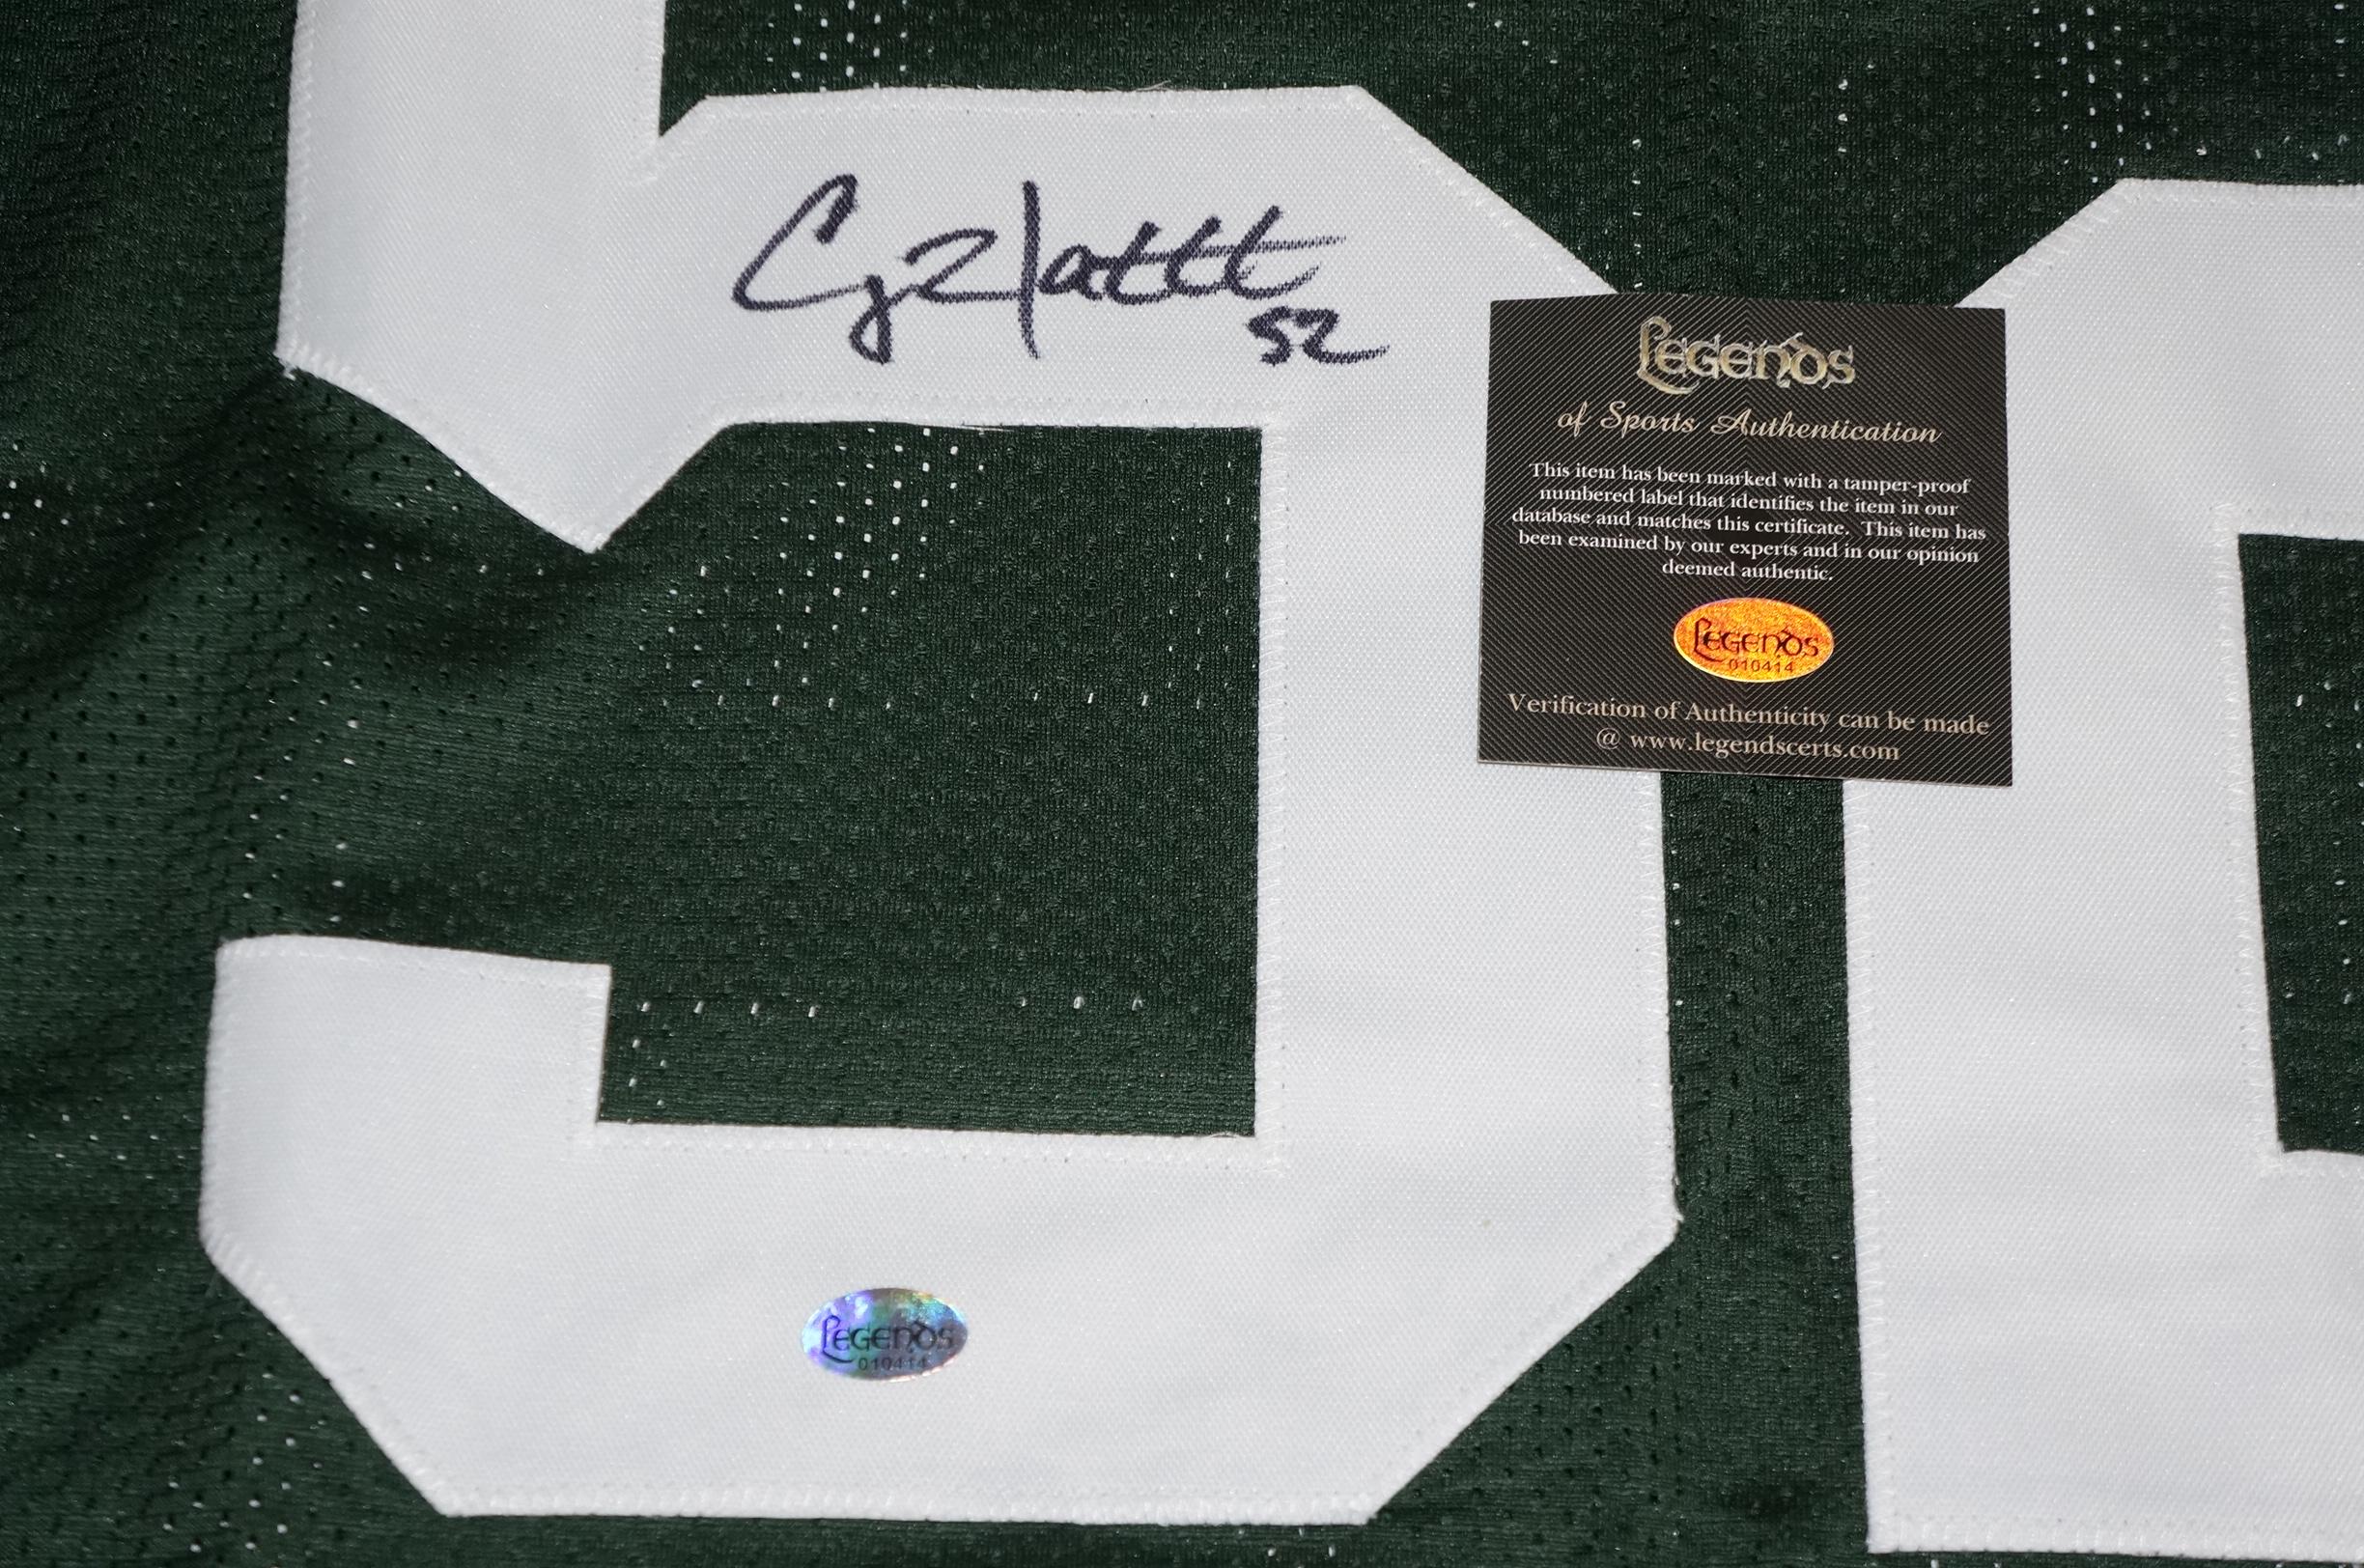 Clay Matthews signed Green Bay Packers Jersey.